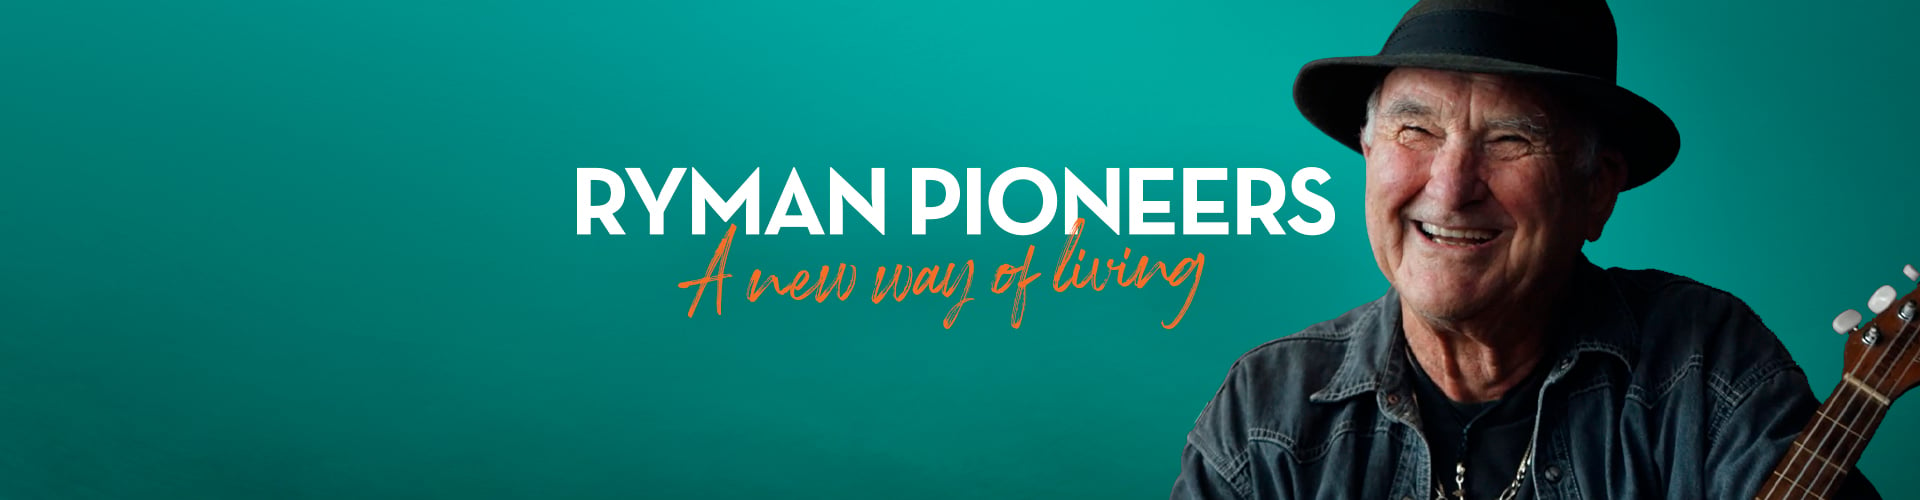 Ryman Pioneers a new way of living homepage banner